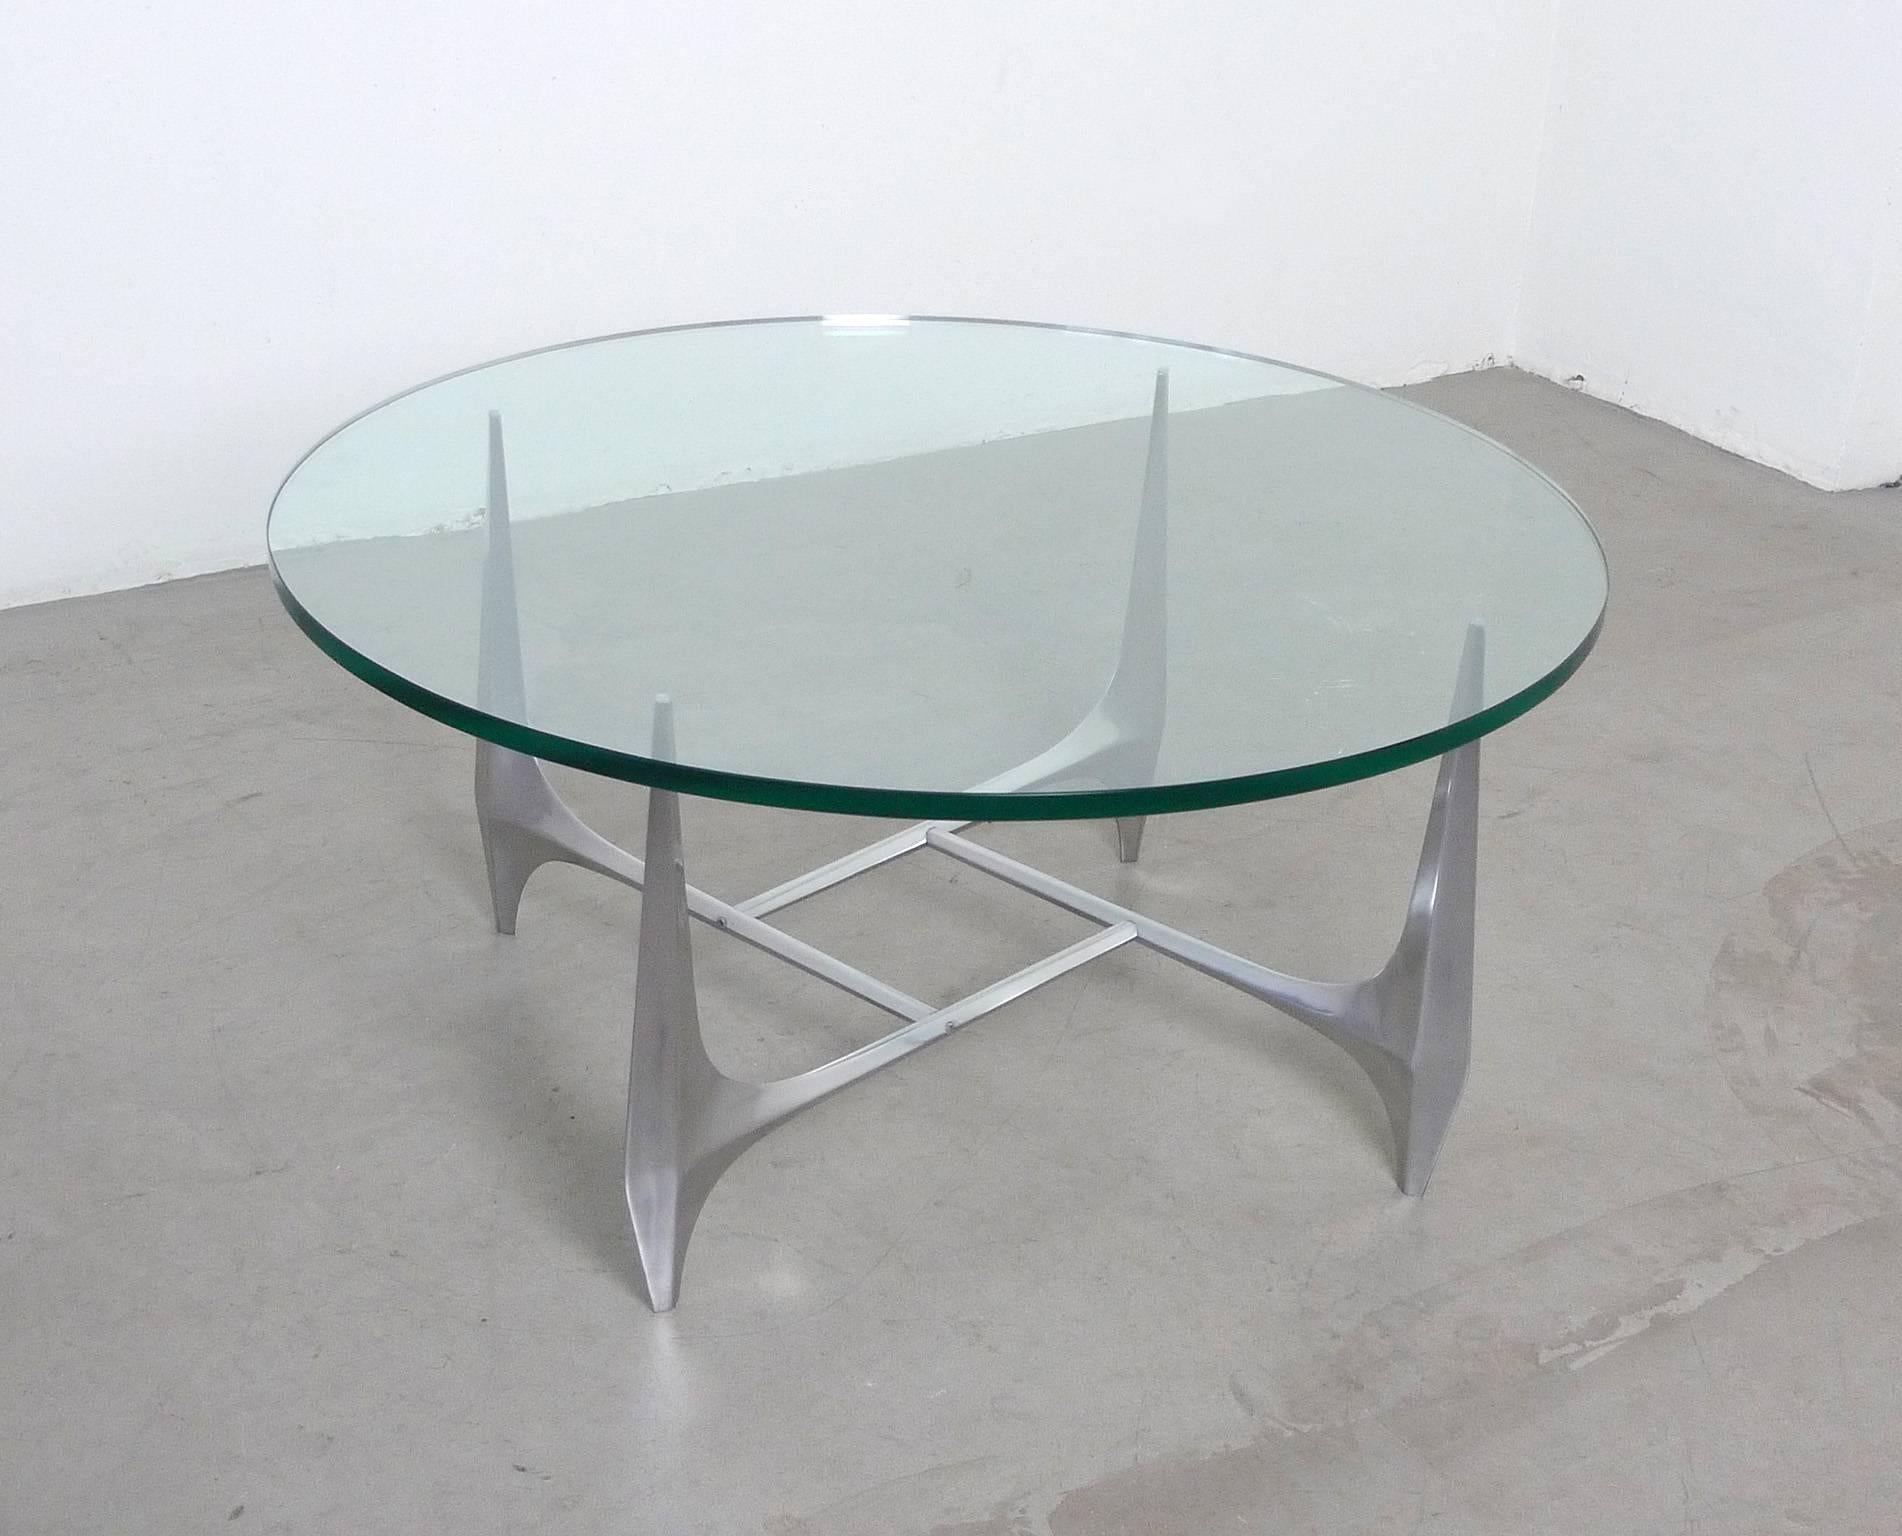 The elegant sculptural base of massive polished aluminium carries a heavy glass plate with beautiful polished edge, which is 2 cm thick and has a diameter of 99 cm. Knut Hesterberg designed this model for Ronald Schmitt in the 1960s. The table is in